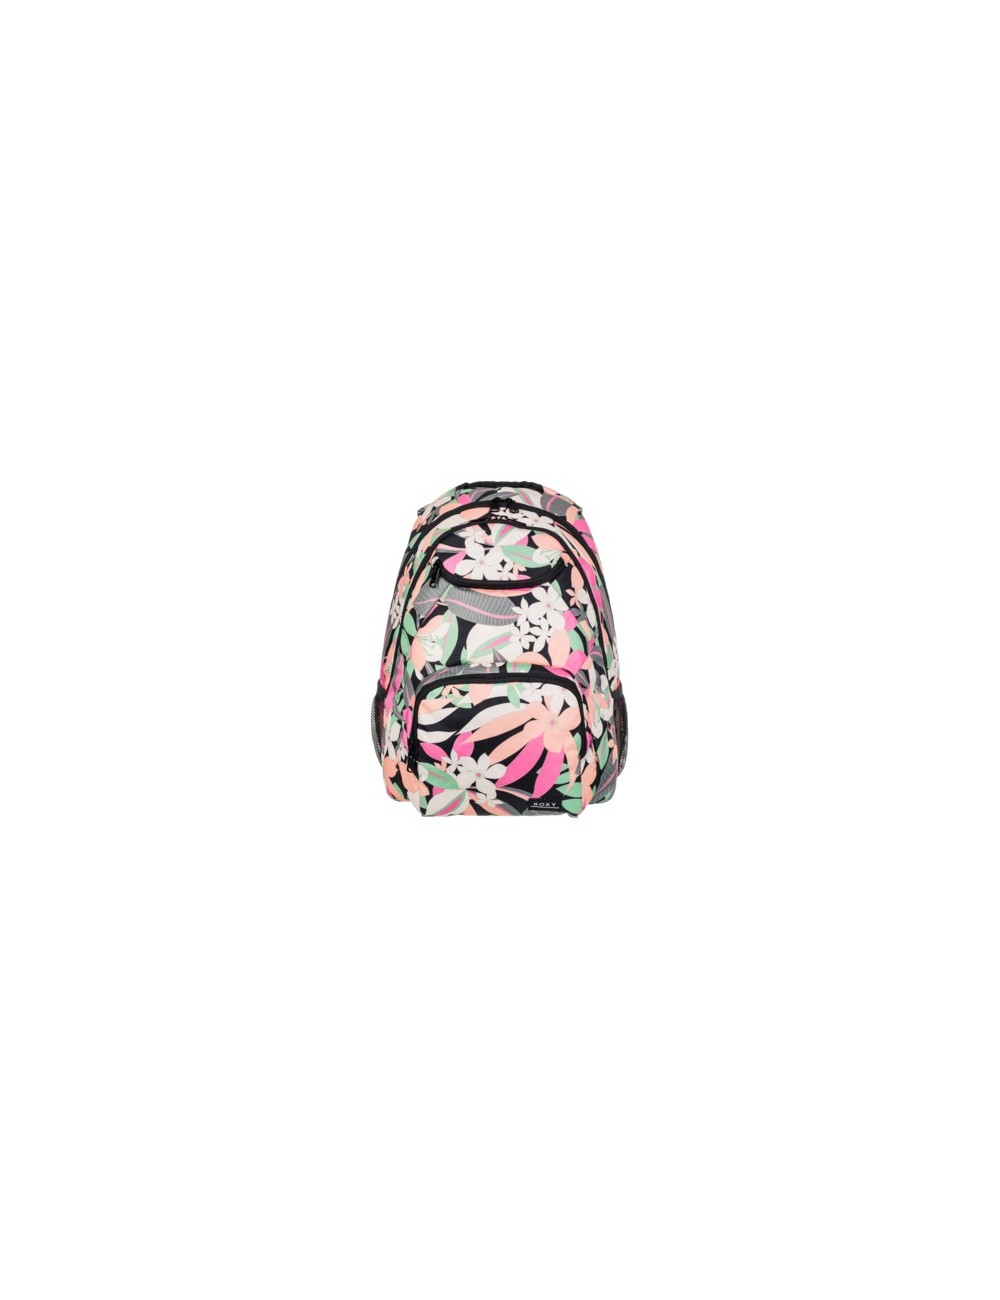 MOCHILA ROXY SHADOW SWELL LO ANTHRACITE PALM SONG AXS